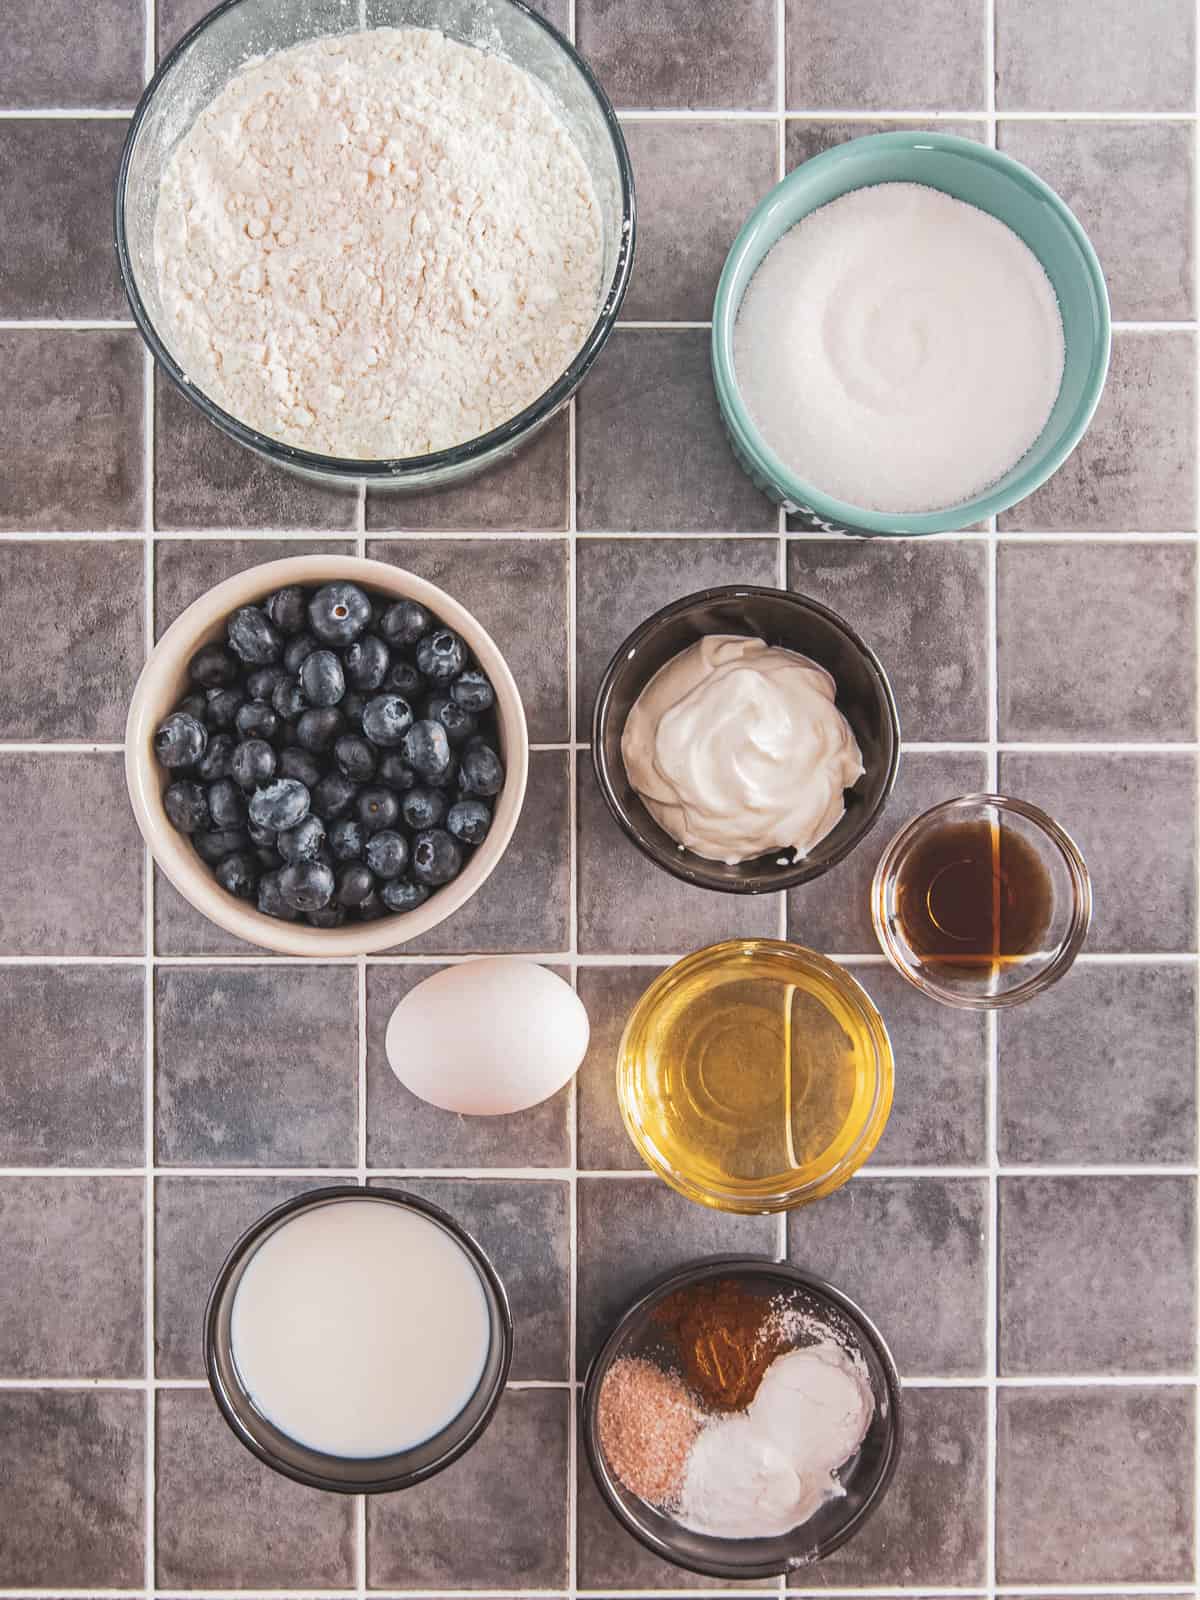 baked blueberry donut ingredients.